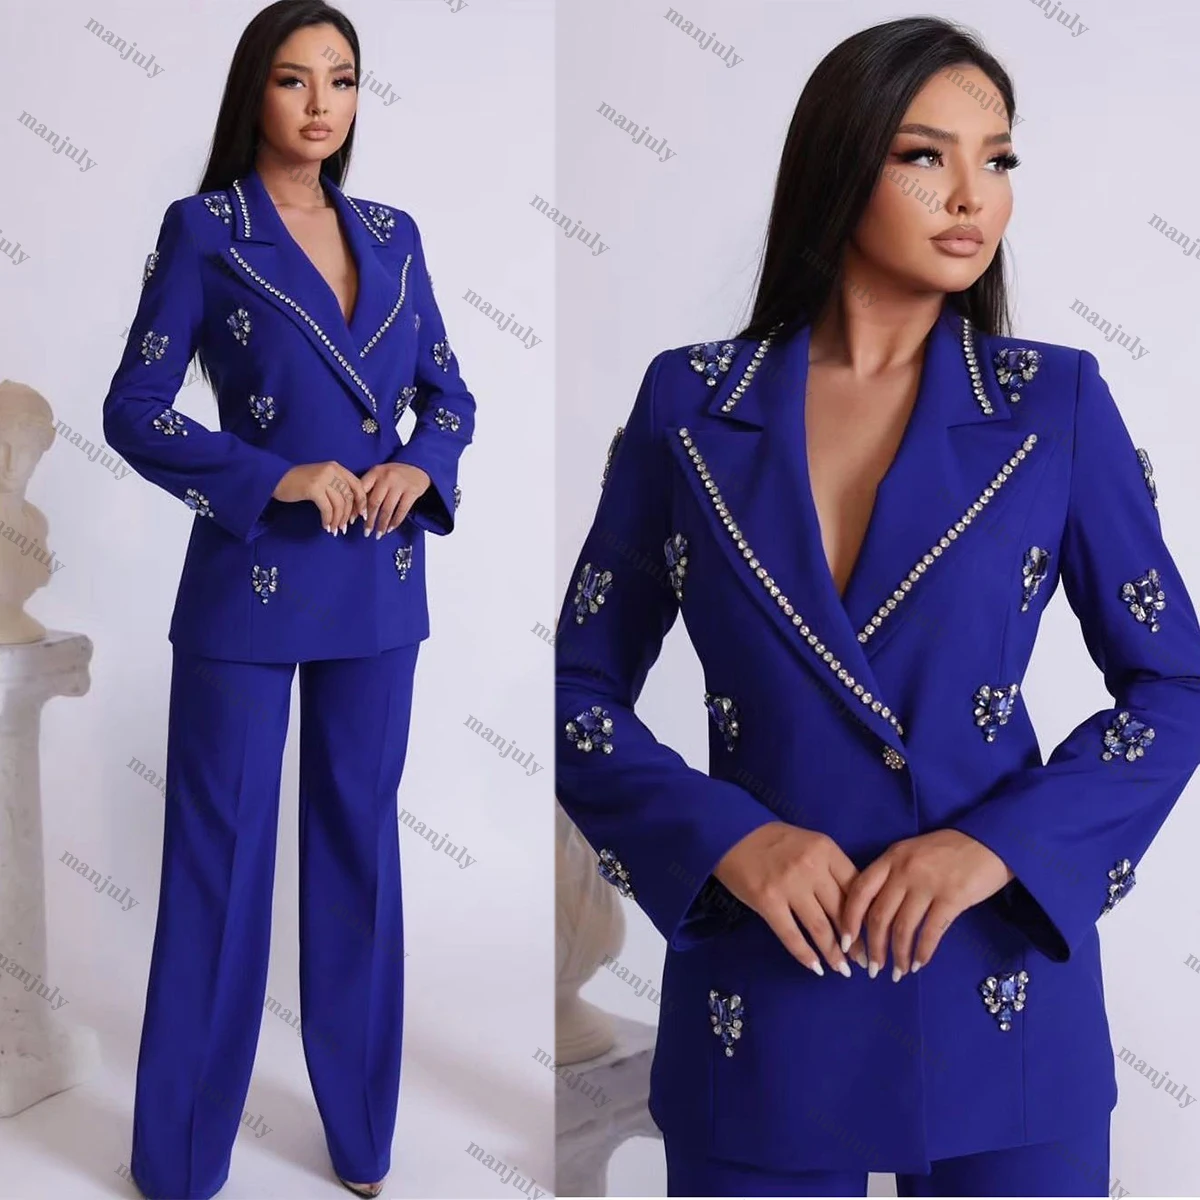 

Fashion Crystal Women Blazer Casual Peaked Lapel One Button Beads Jacket 2 Pieces Prom Celebrity Custom Made Suits